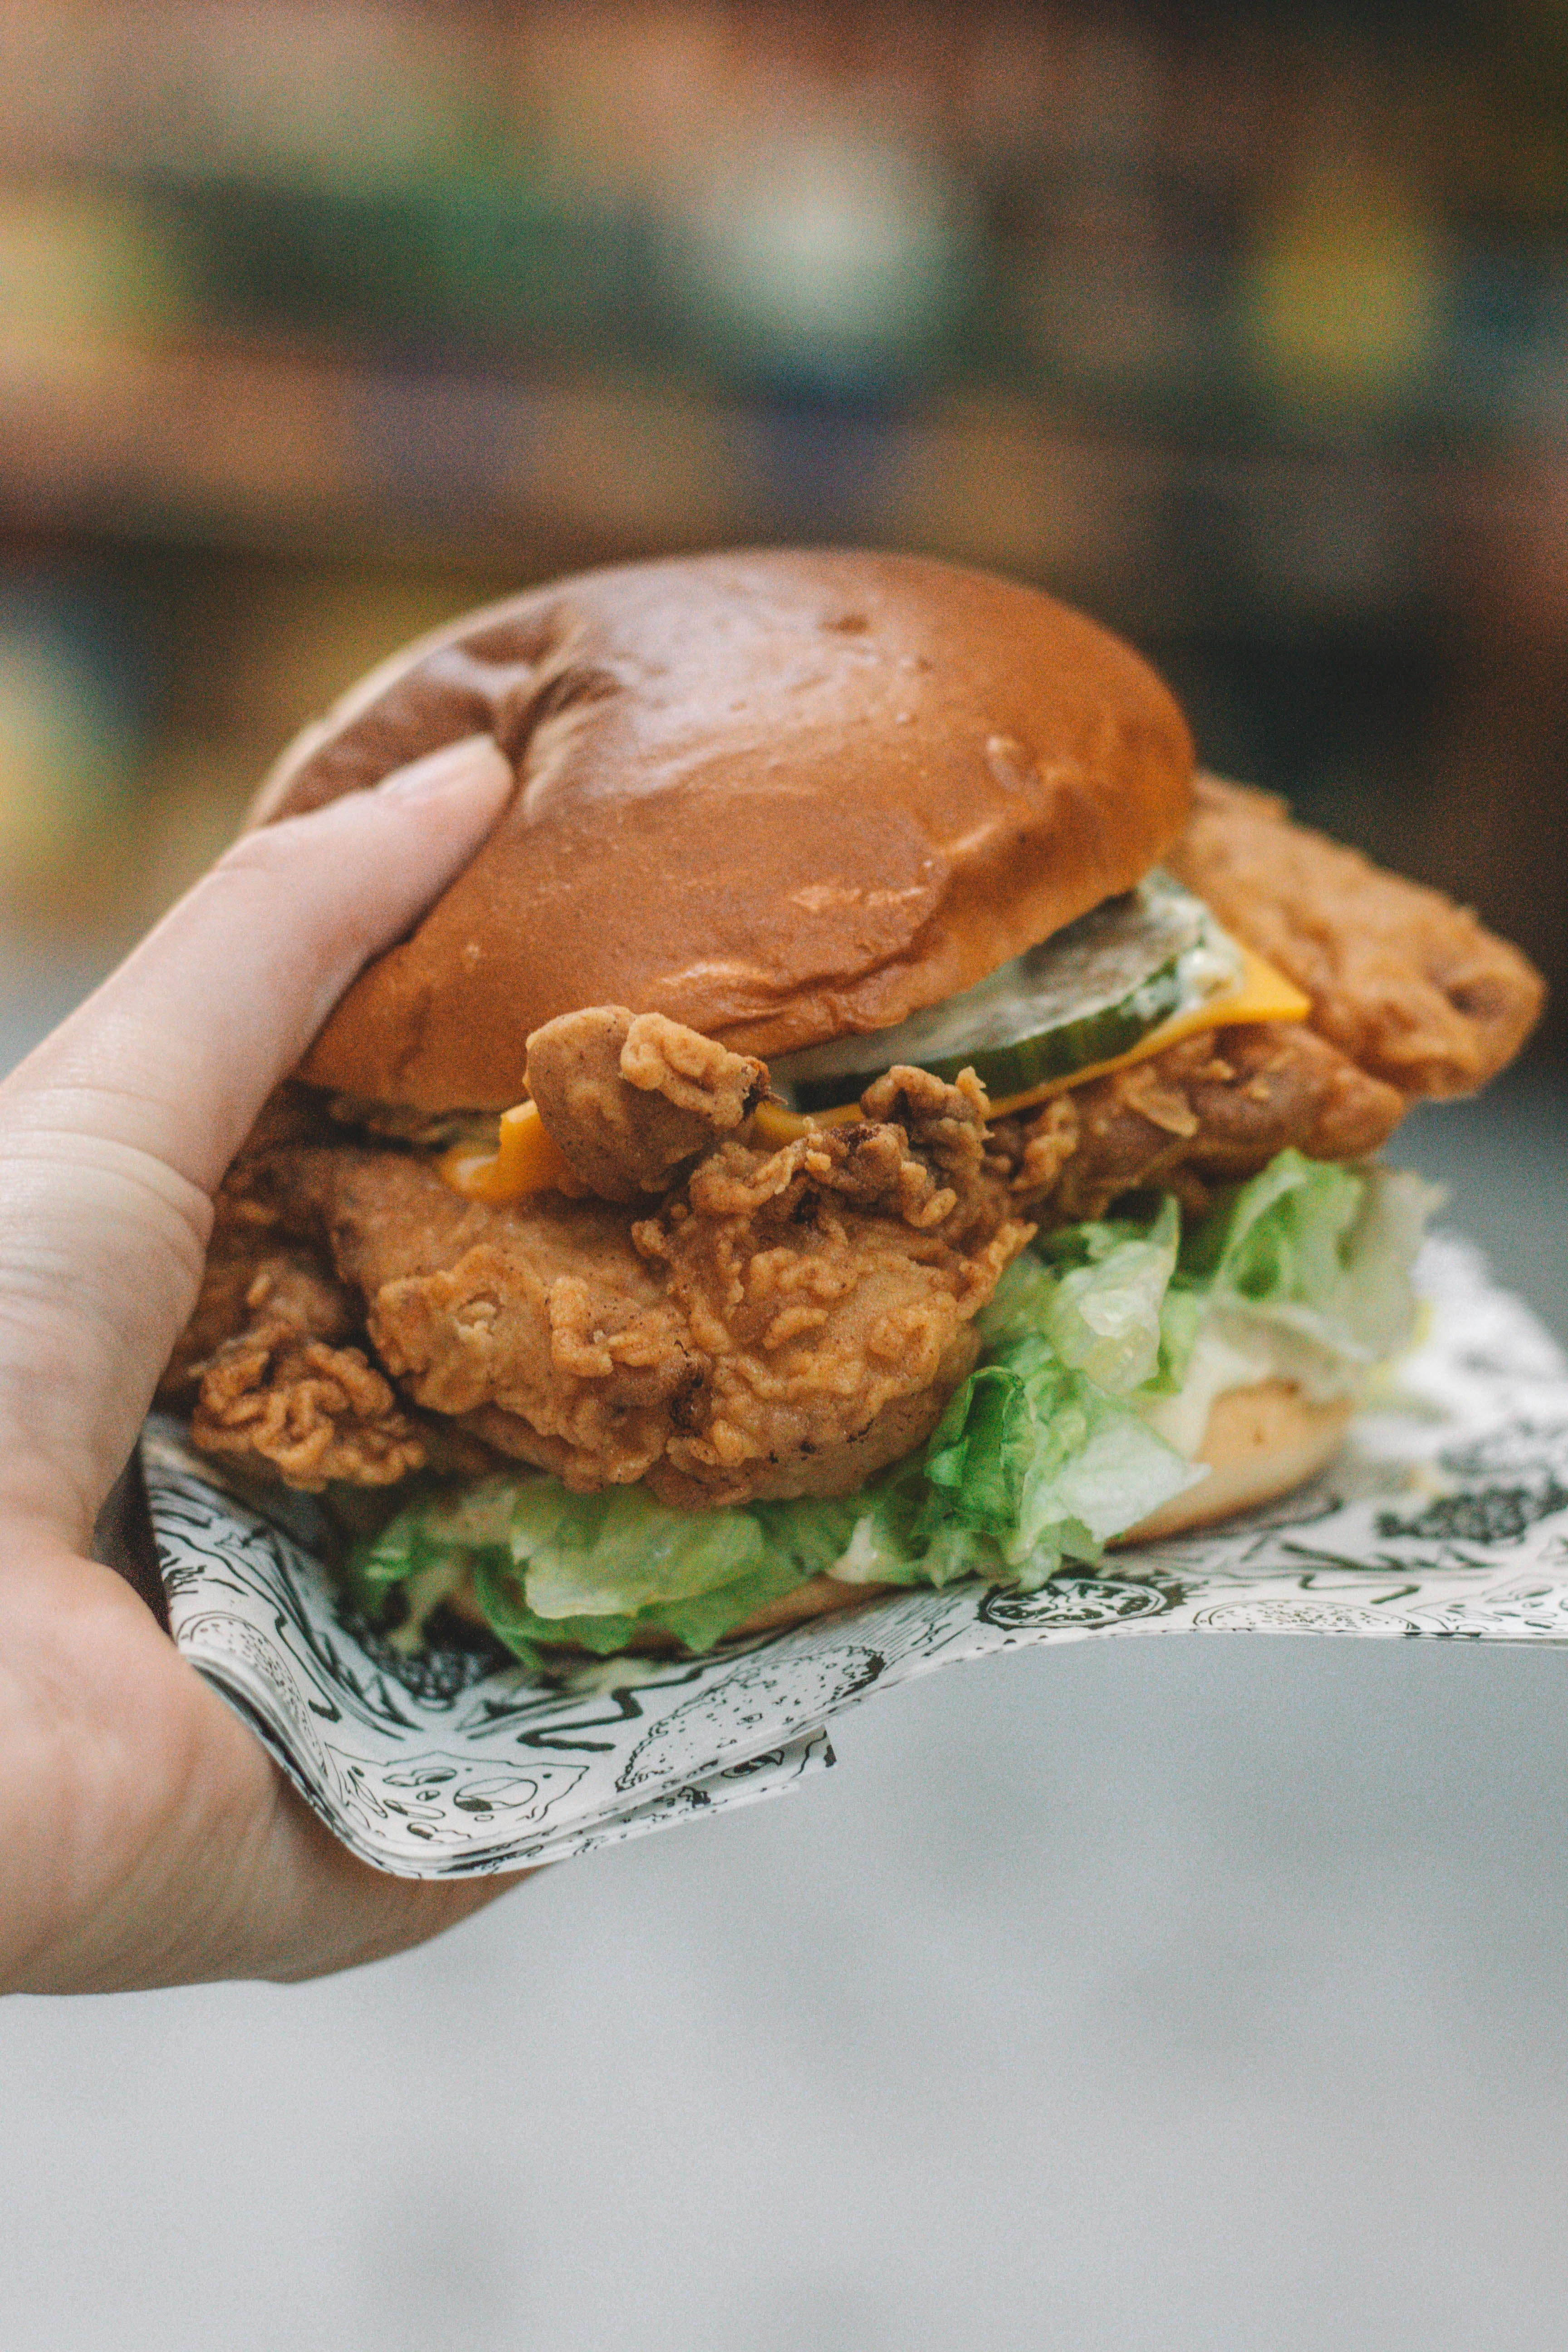 A fried chicken burger by Amsterdam-based restaurant The Beef Chief.